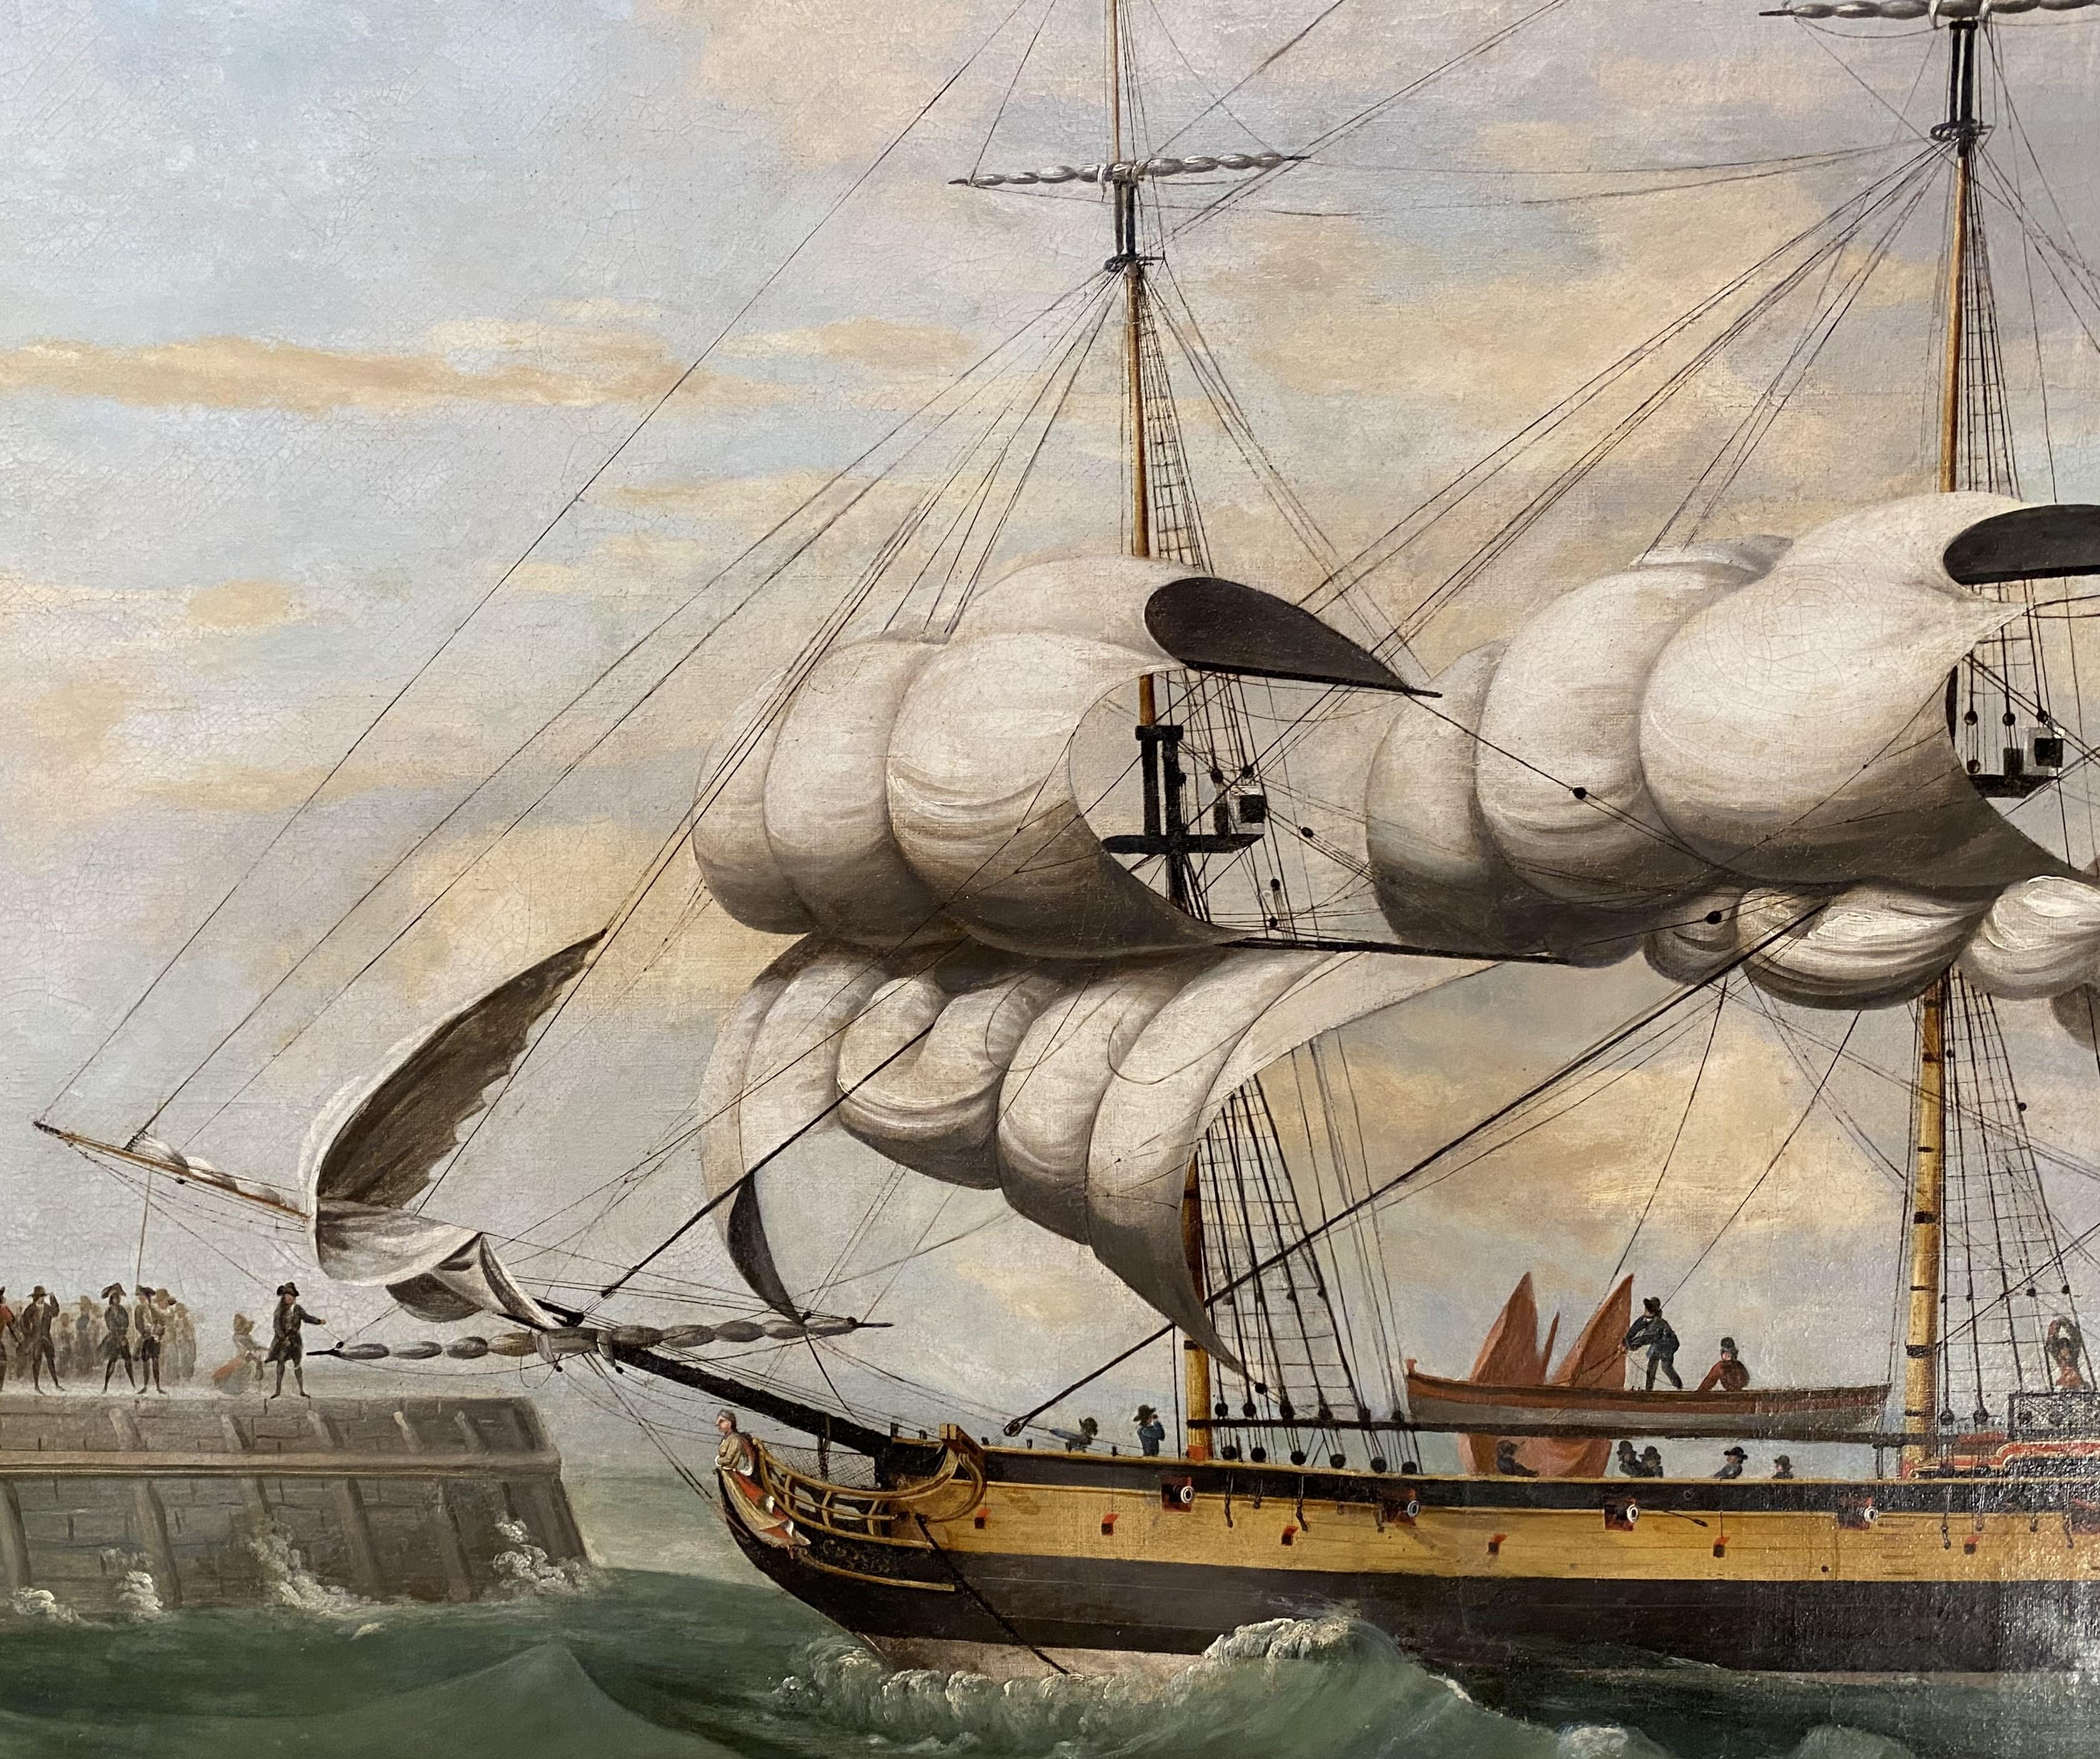 A large marine painting probably depicting a British East Indiaman ship returning from a voyage to the East, attributed to British artist Francis Holman (c1720-1790). Born in Ramsgate, England, Holman was immersed in the maritime world from a young